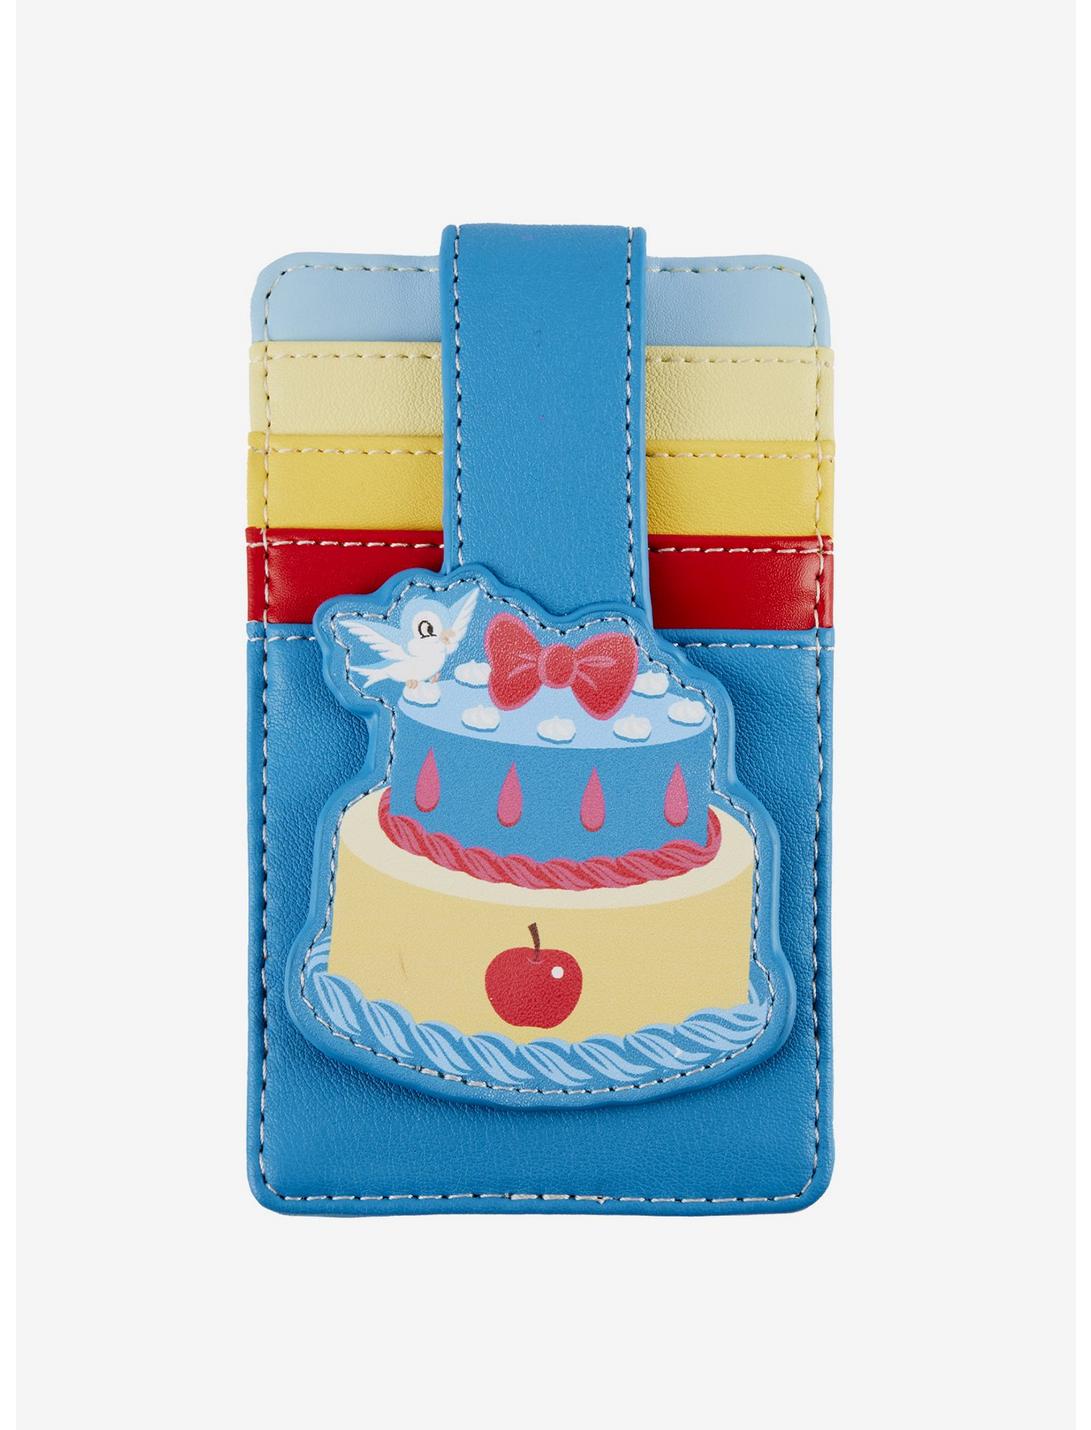 Loungefly Disney Snow White And The Seven Dwarfs Cake Cardholder, , hi-res